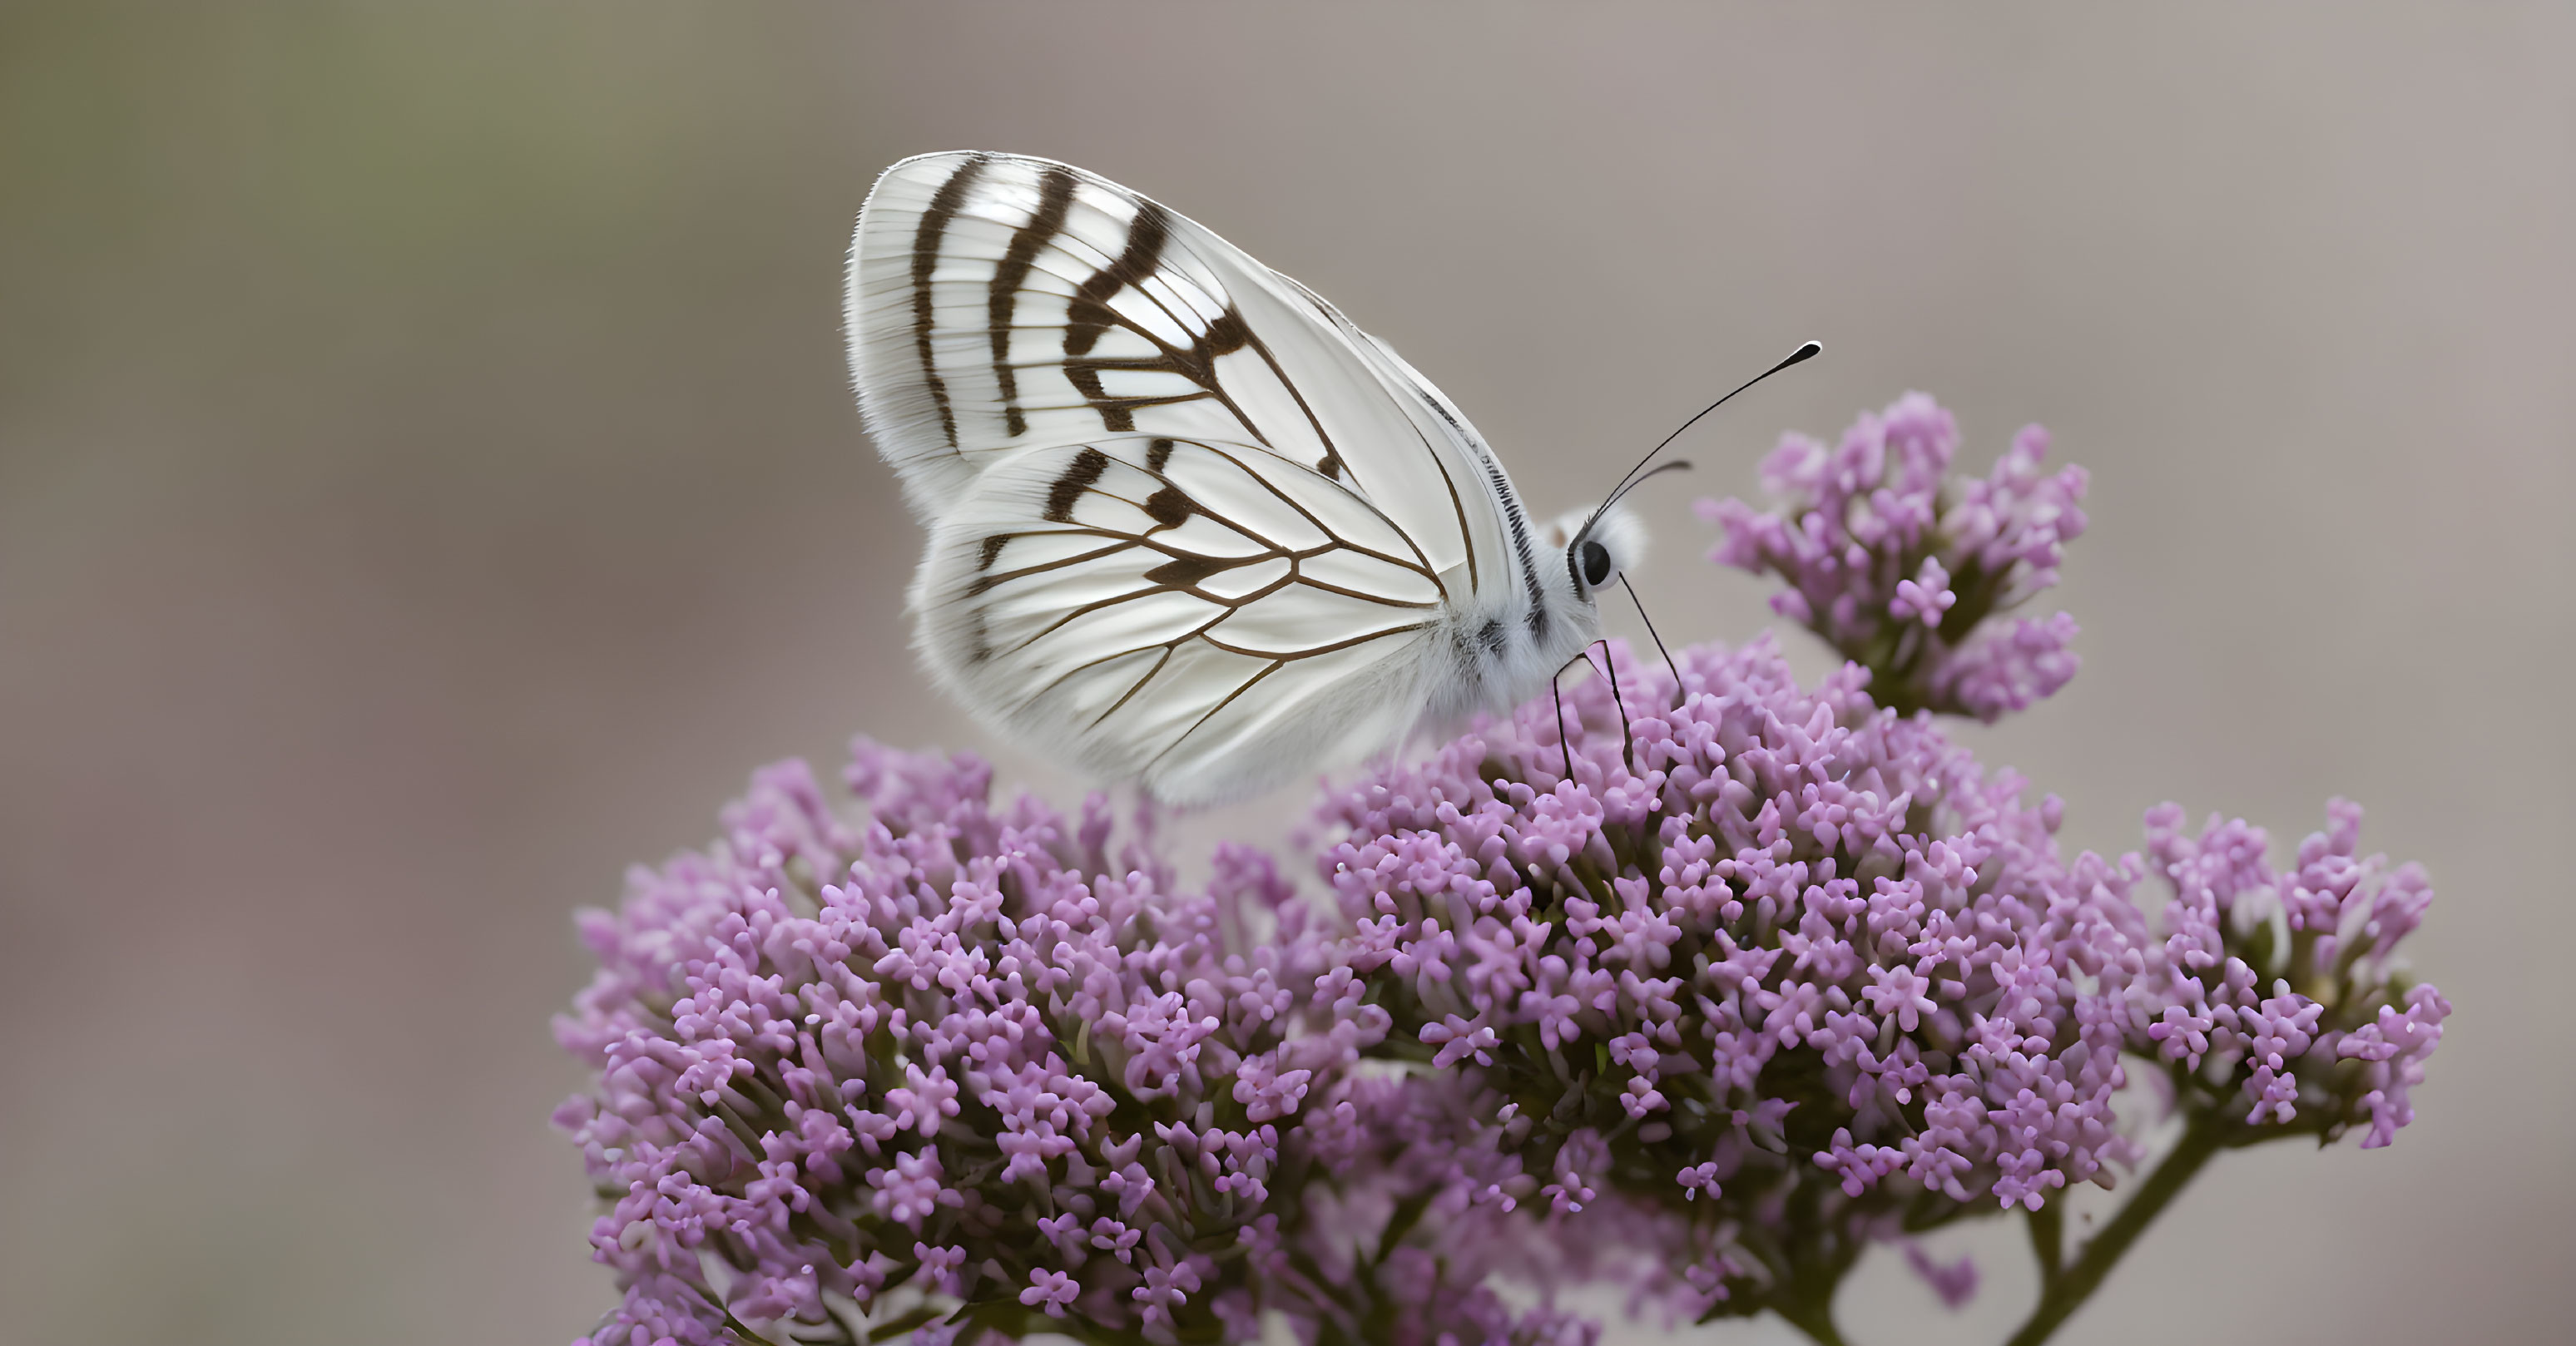 White butterfly with black vein markings on pink flowers in blurred background